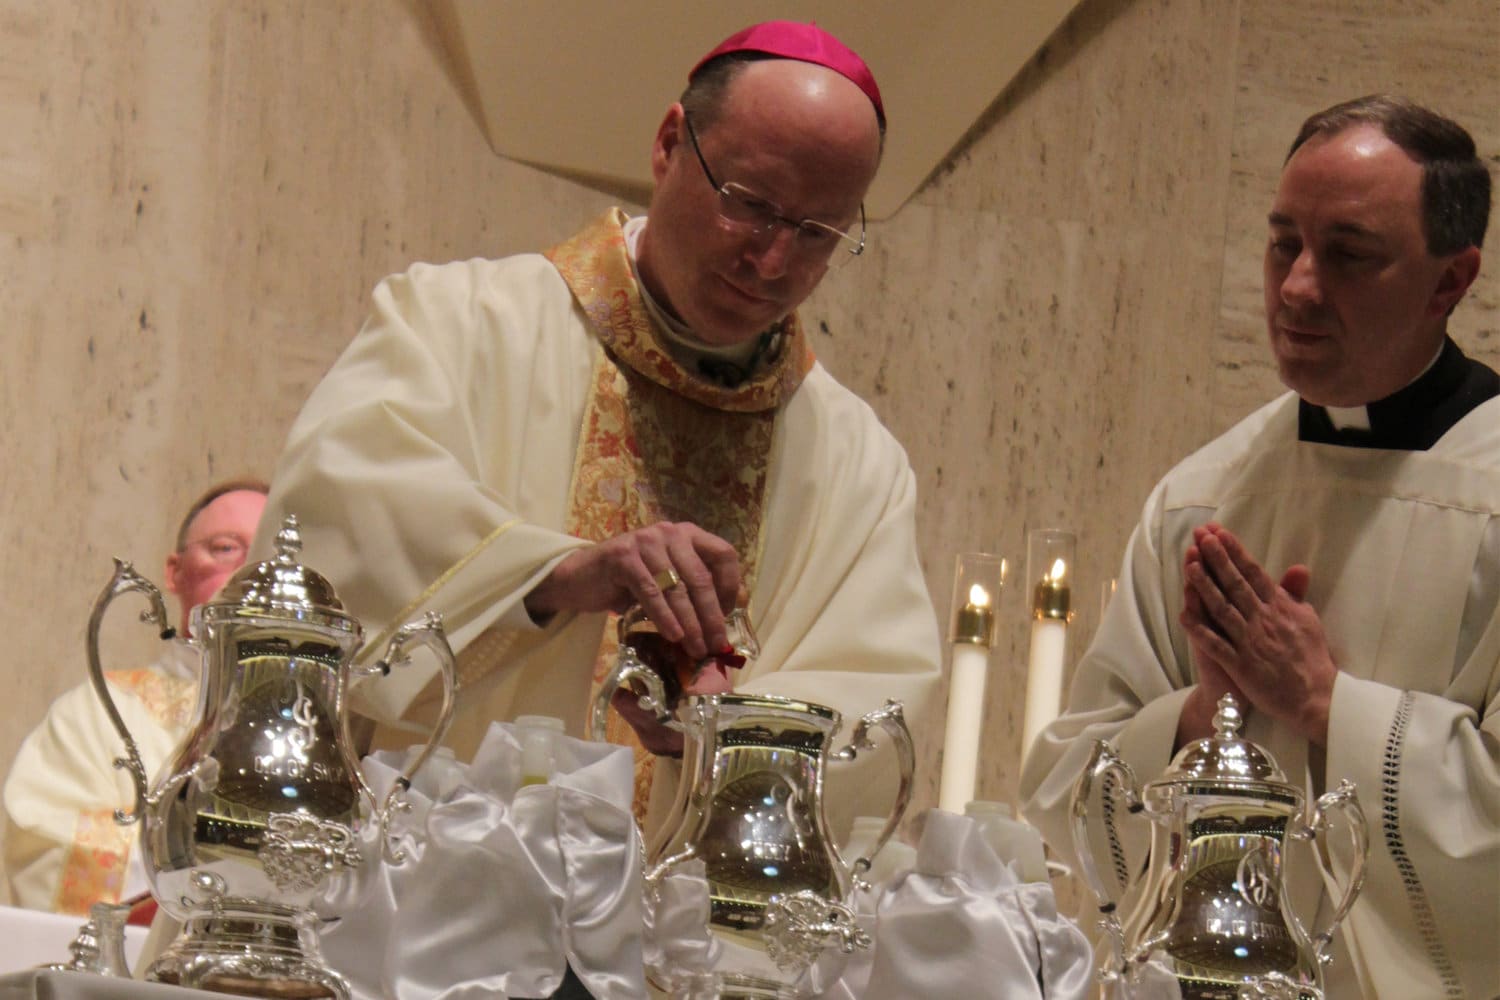 Chrism Mass 2019 at the Cathedral of St. Joseph